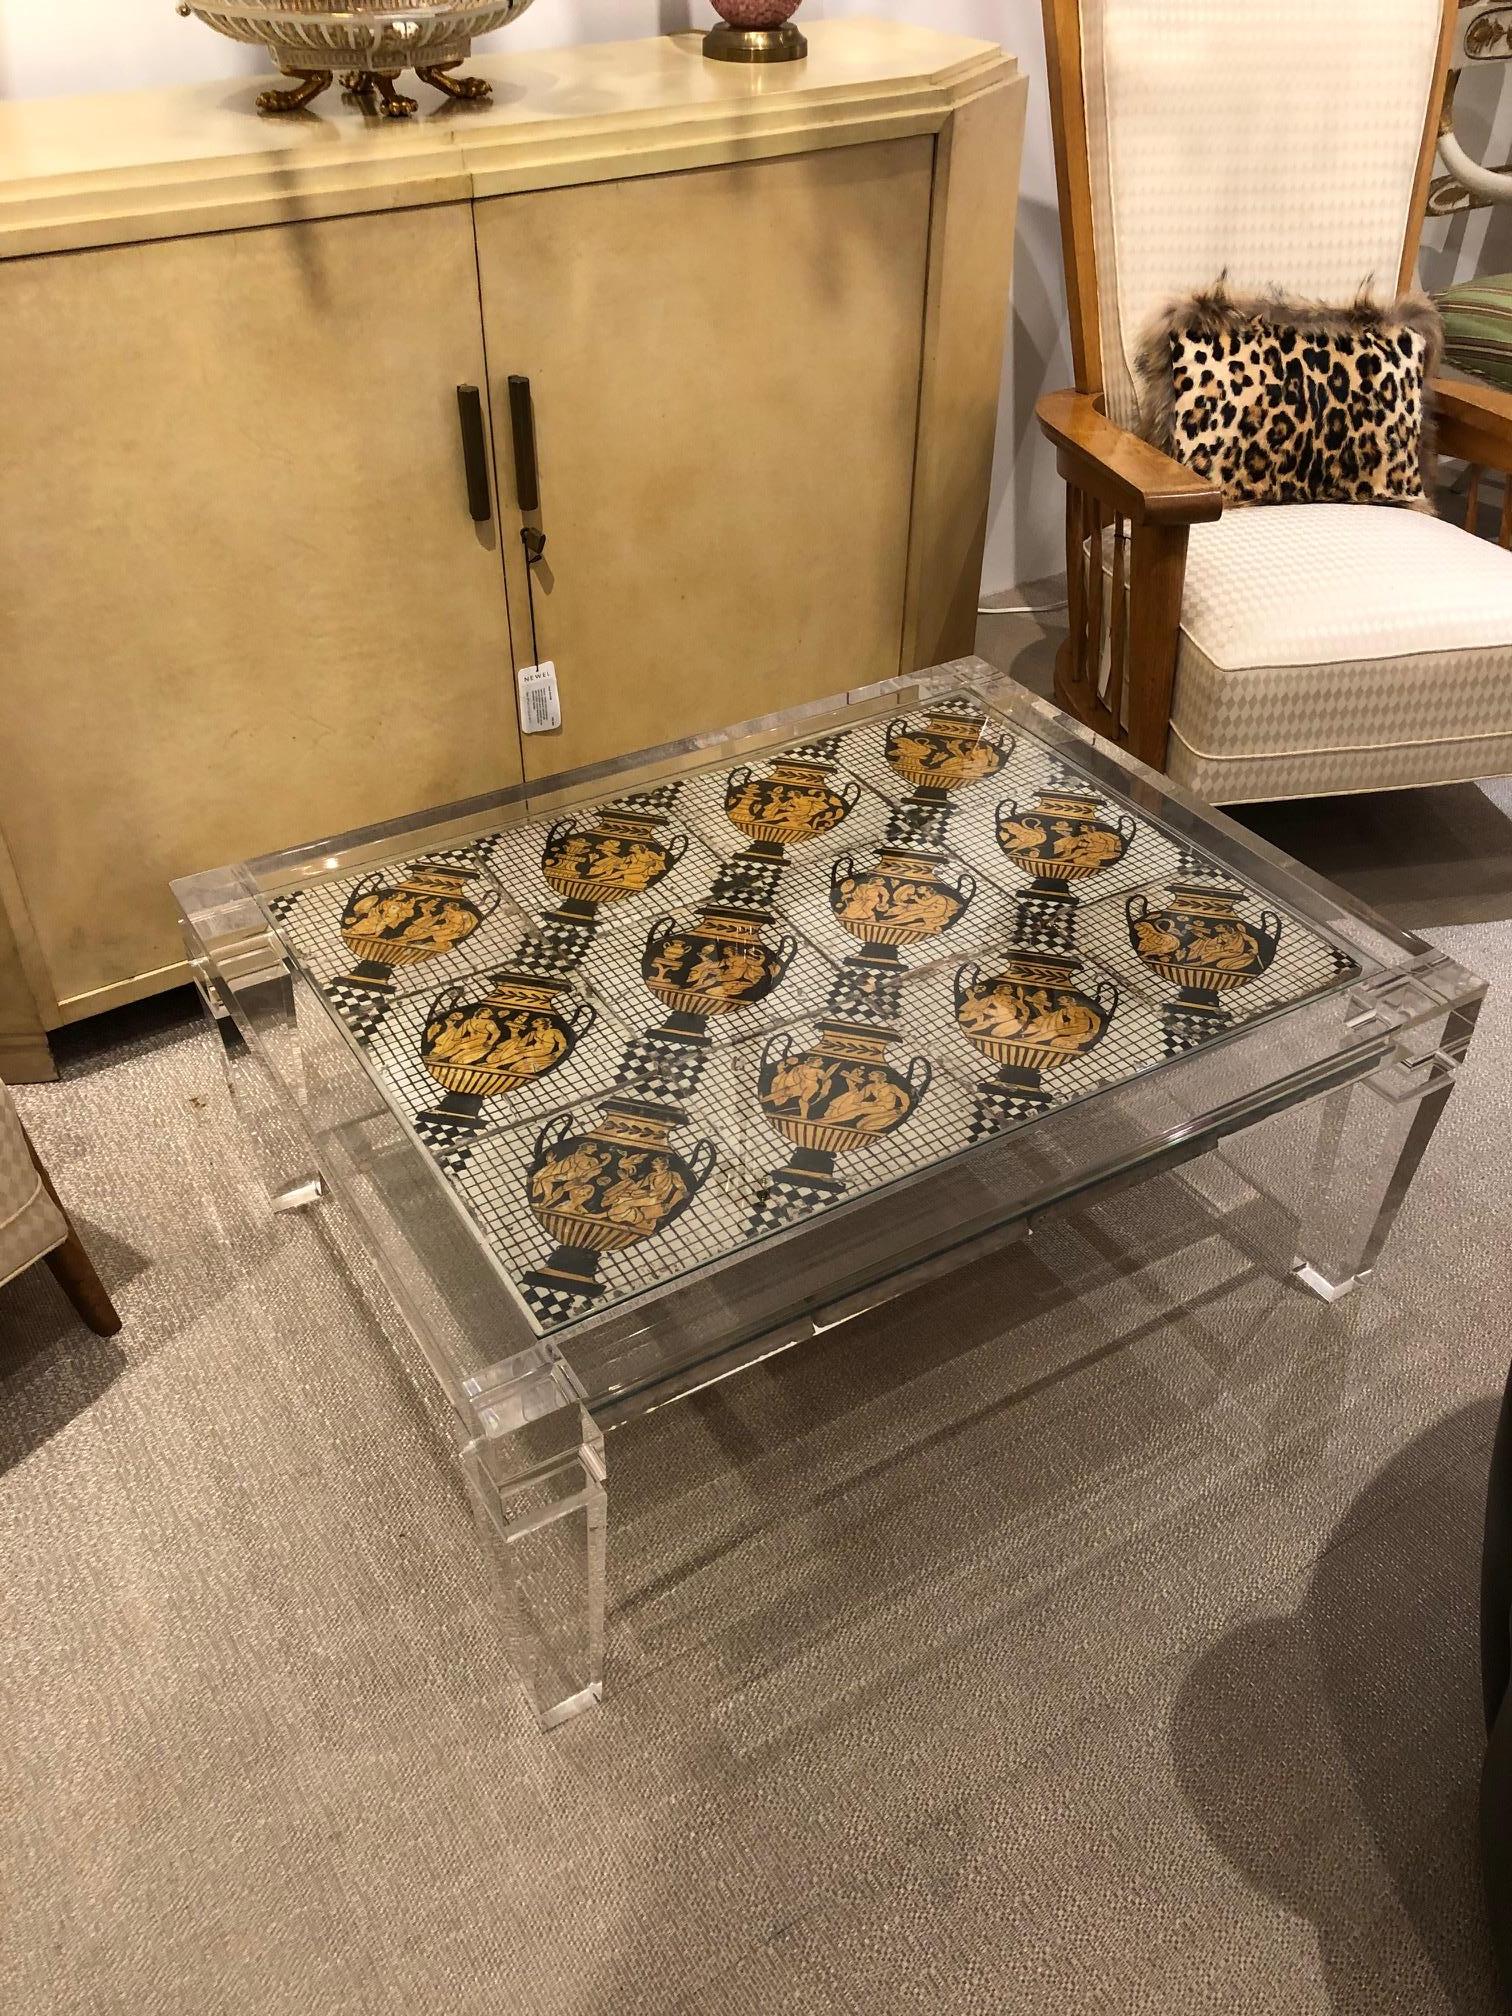 French (1940s) rectangular lucite coffee table with twelve black, white, and gold tiles with classical urn design. (attributed to: MAISON JANSEN)
